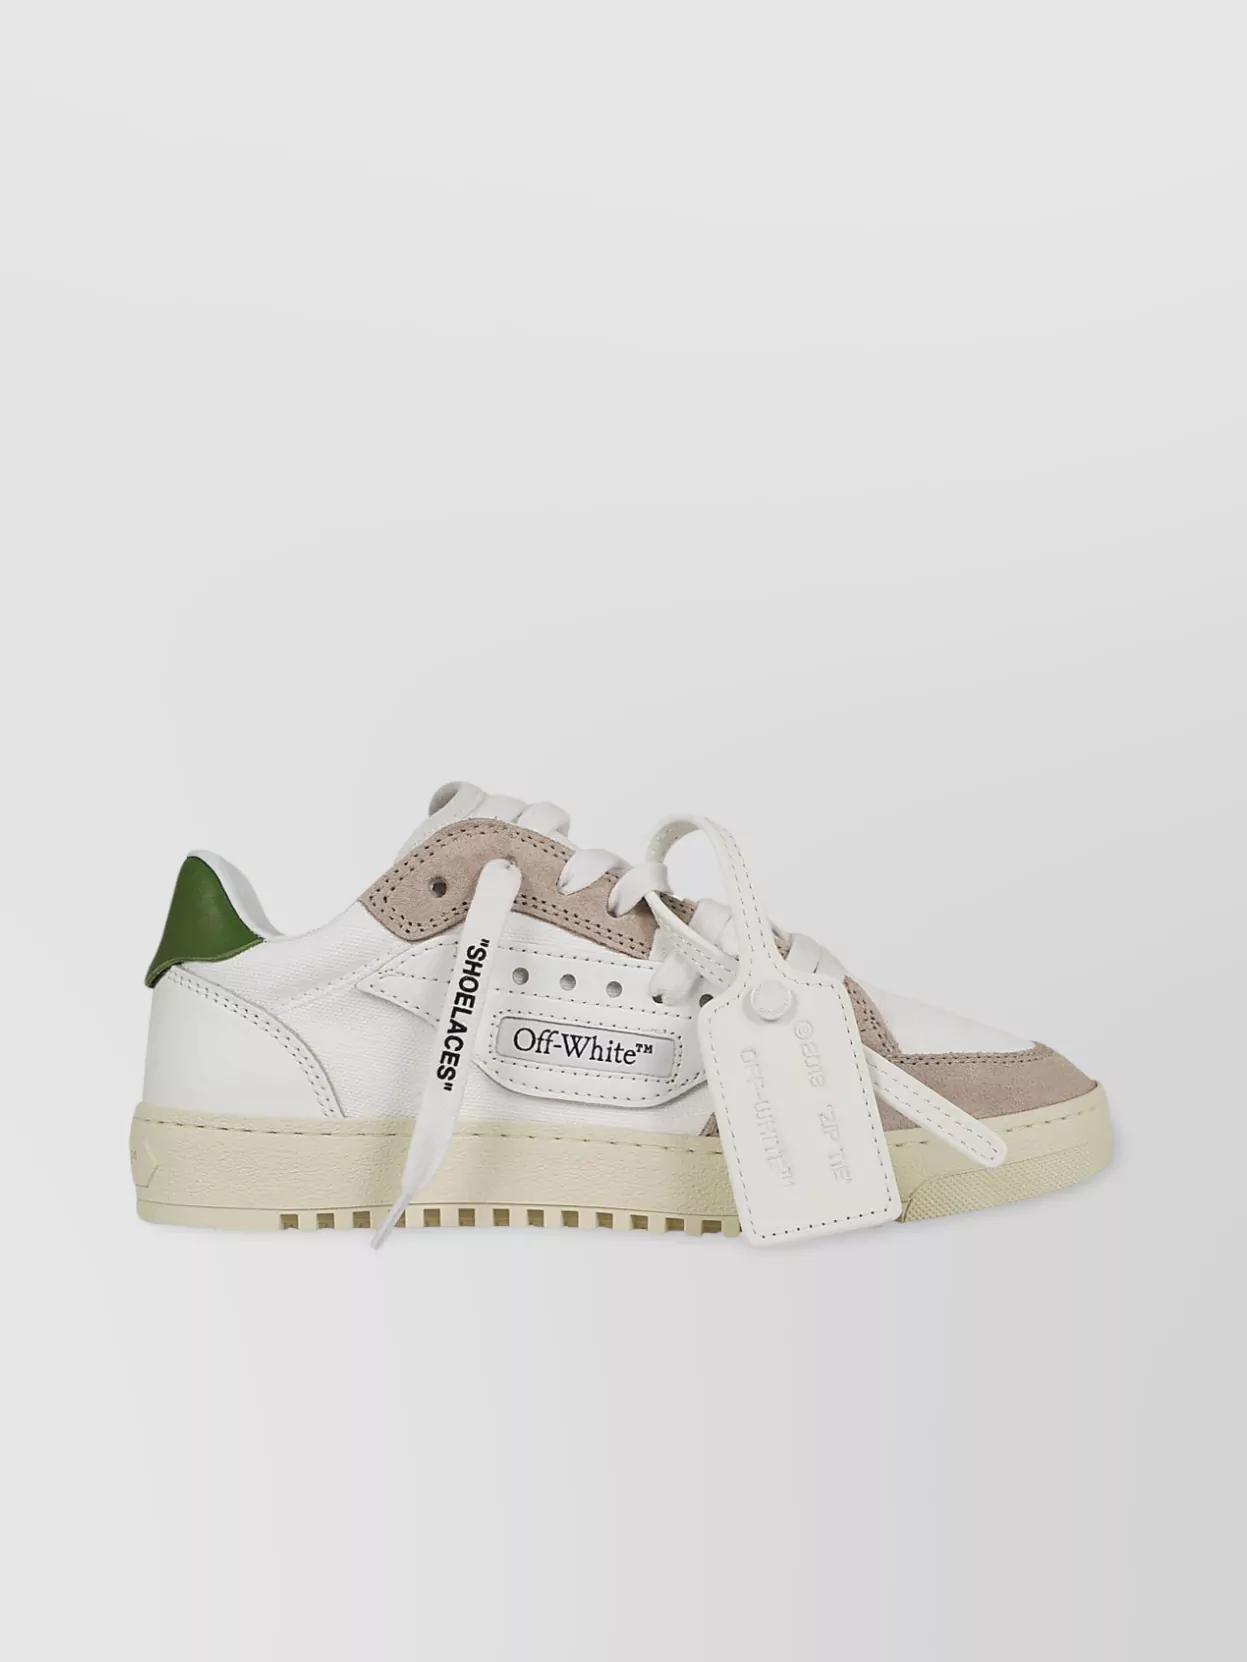 OFF-WHITE STREAMLINED SNEAKER WITH PERFORATED AND SUEDE ACCENTS